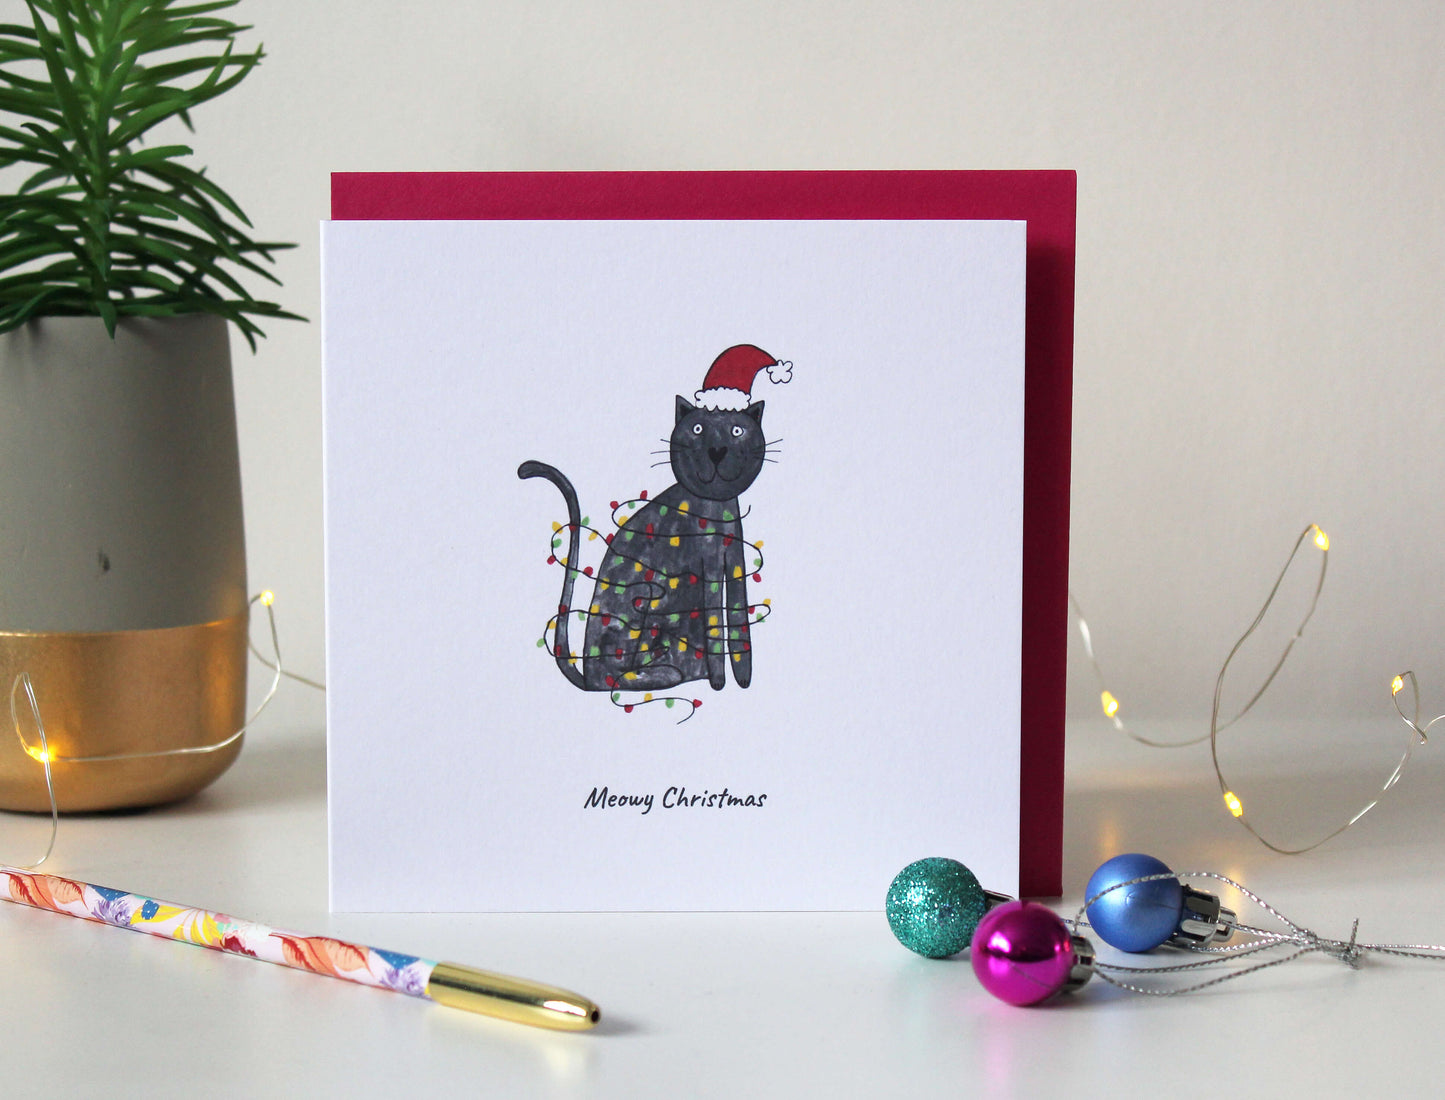 Have a 'Meowy Christmas' funny cat Christmas card